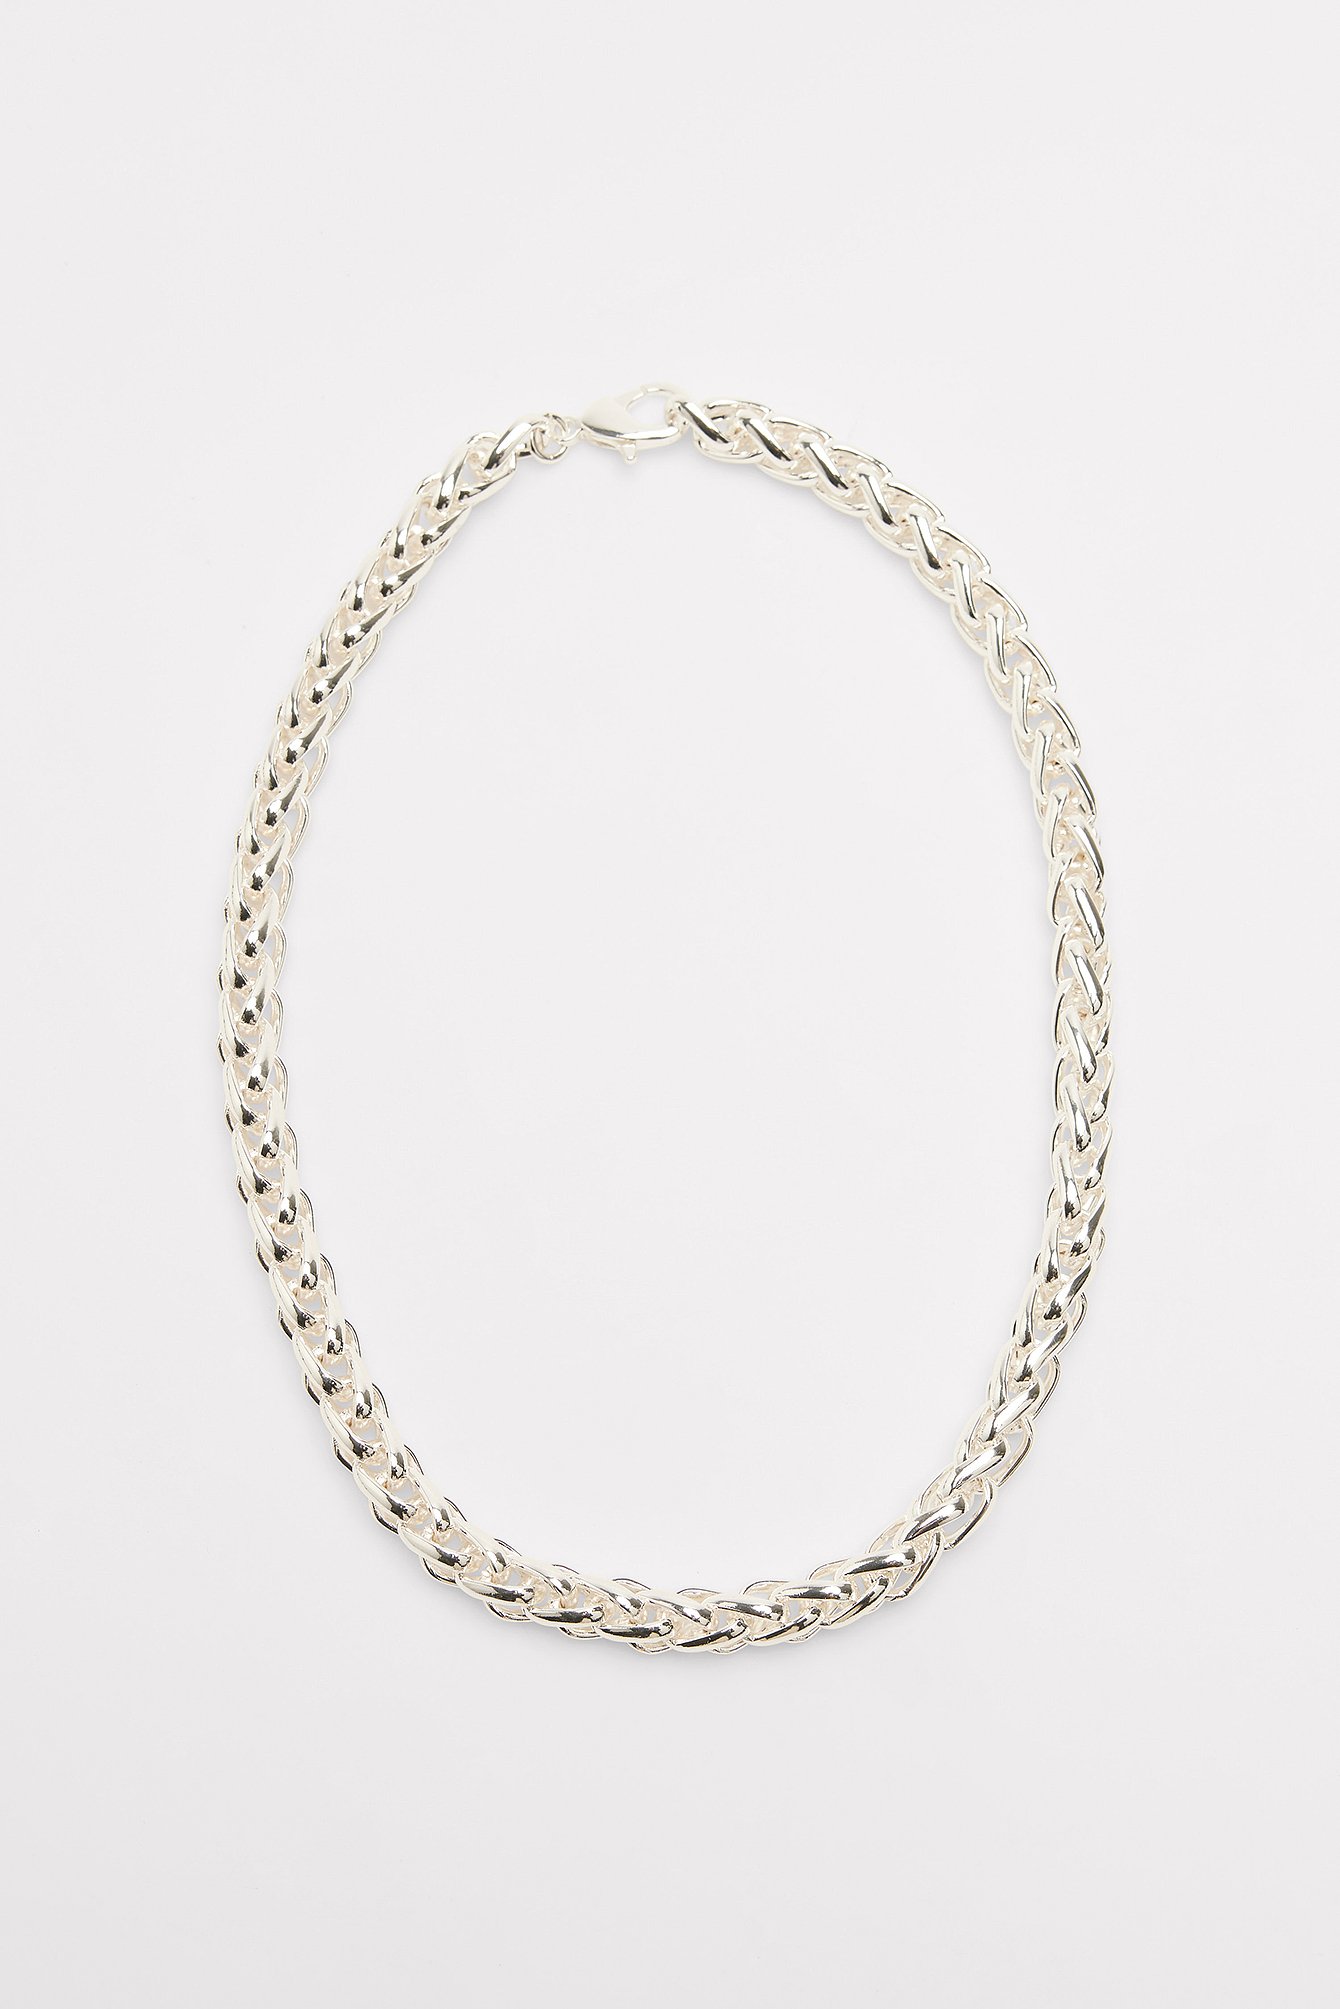 Silver Silver Plated Braided Chain